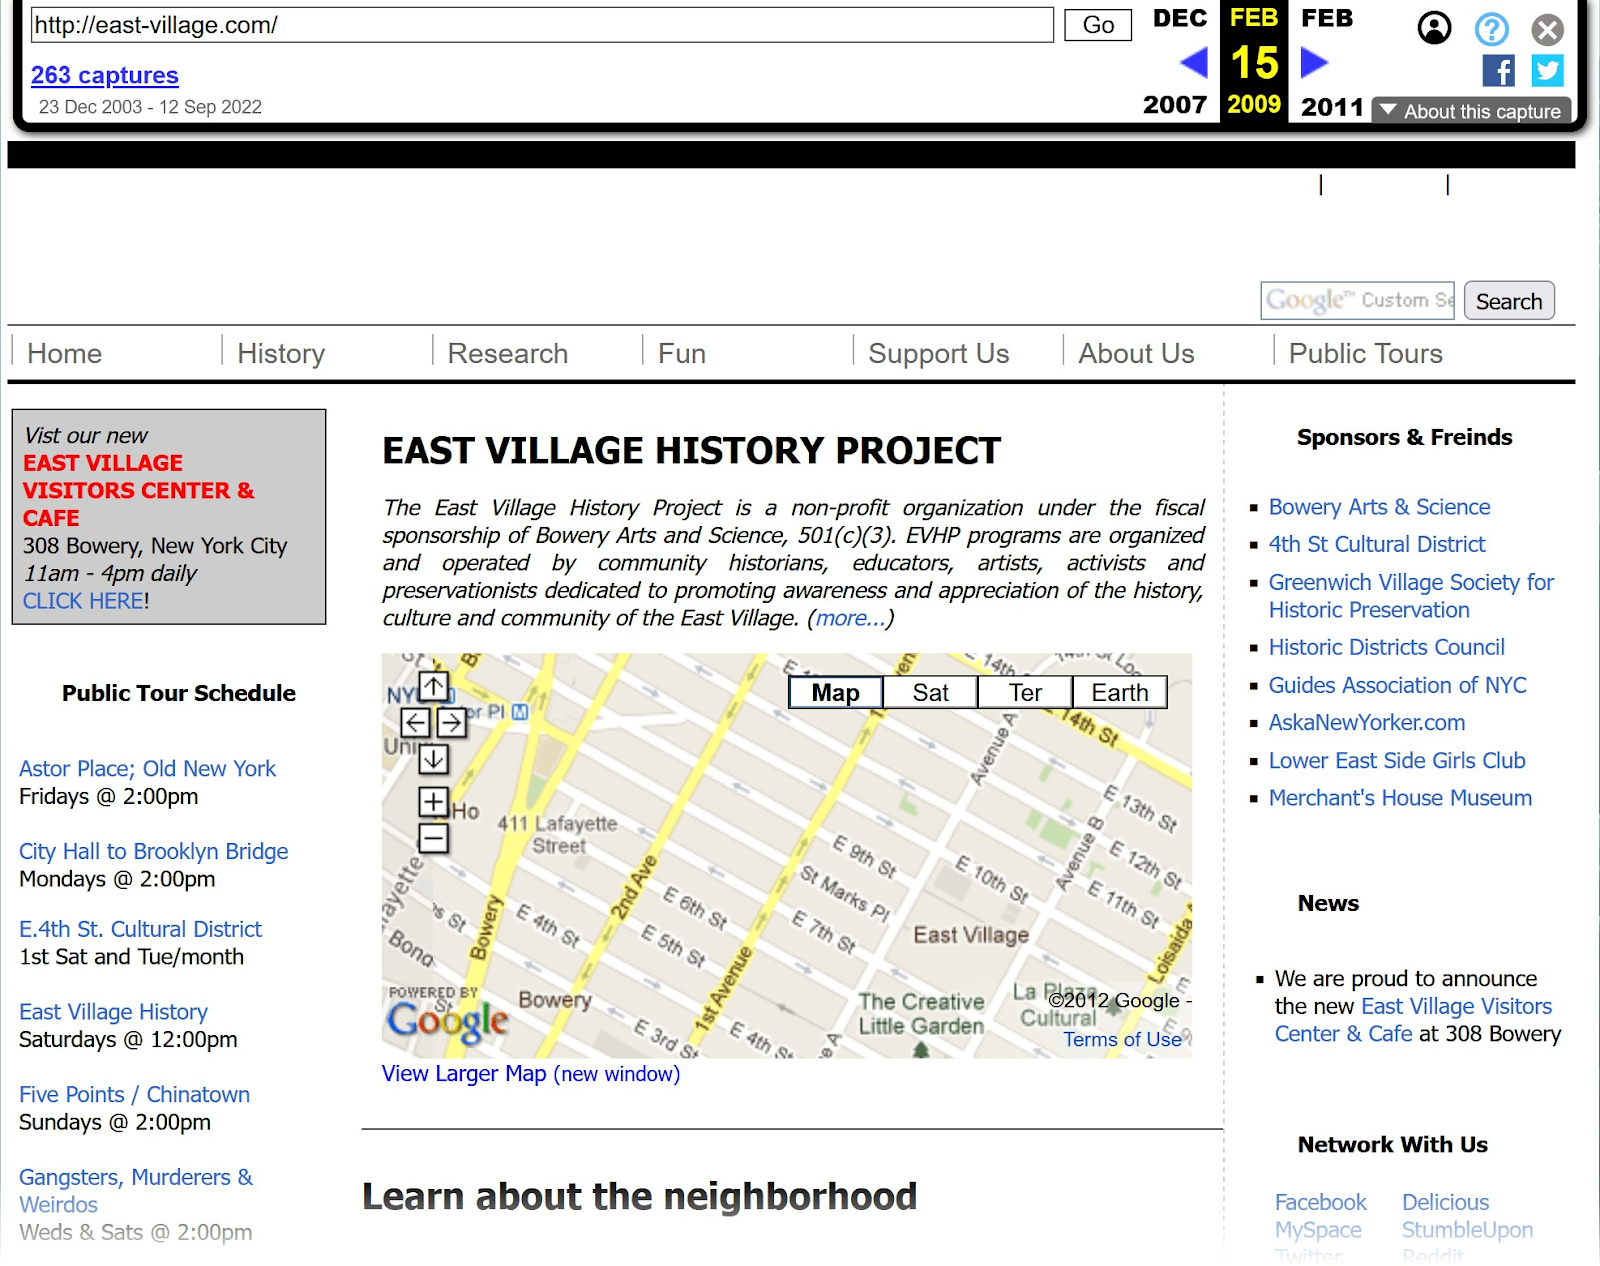 example of a deleted page titled "east village history project"